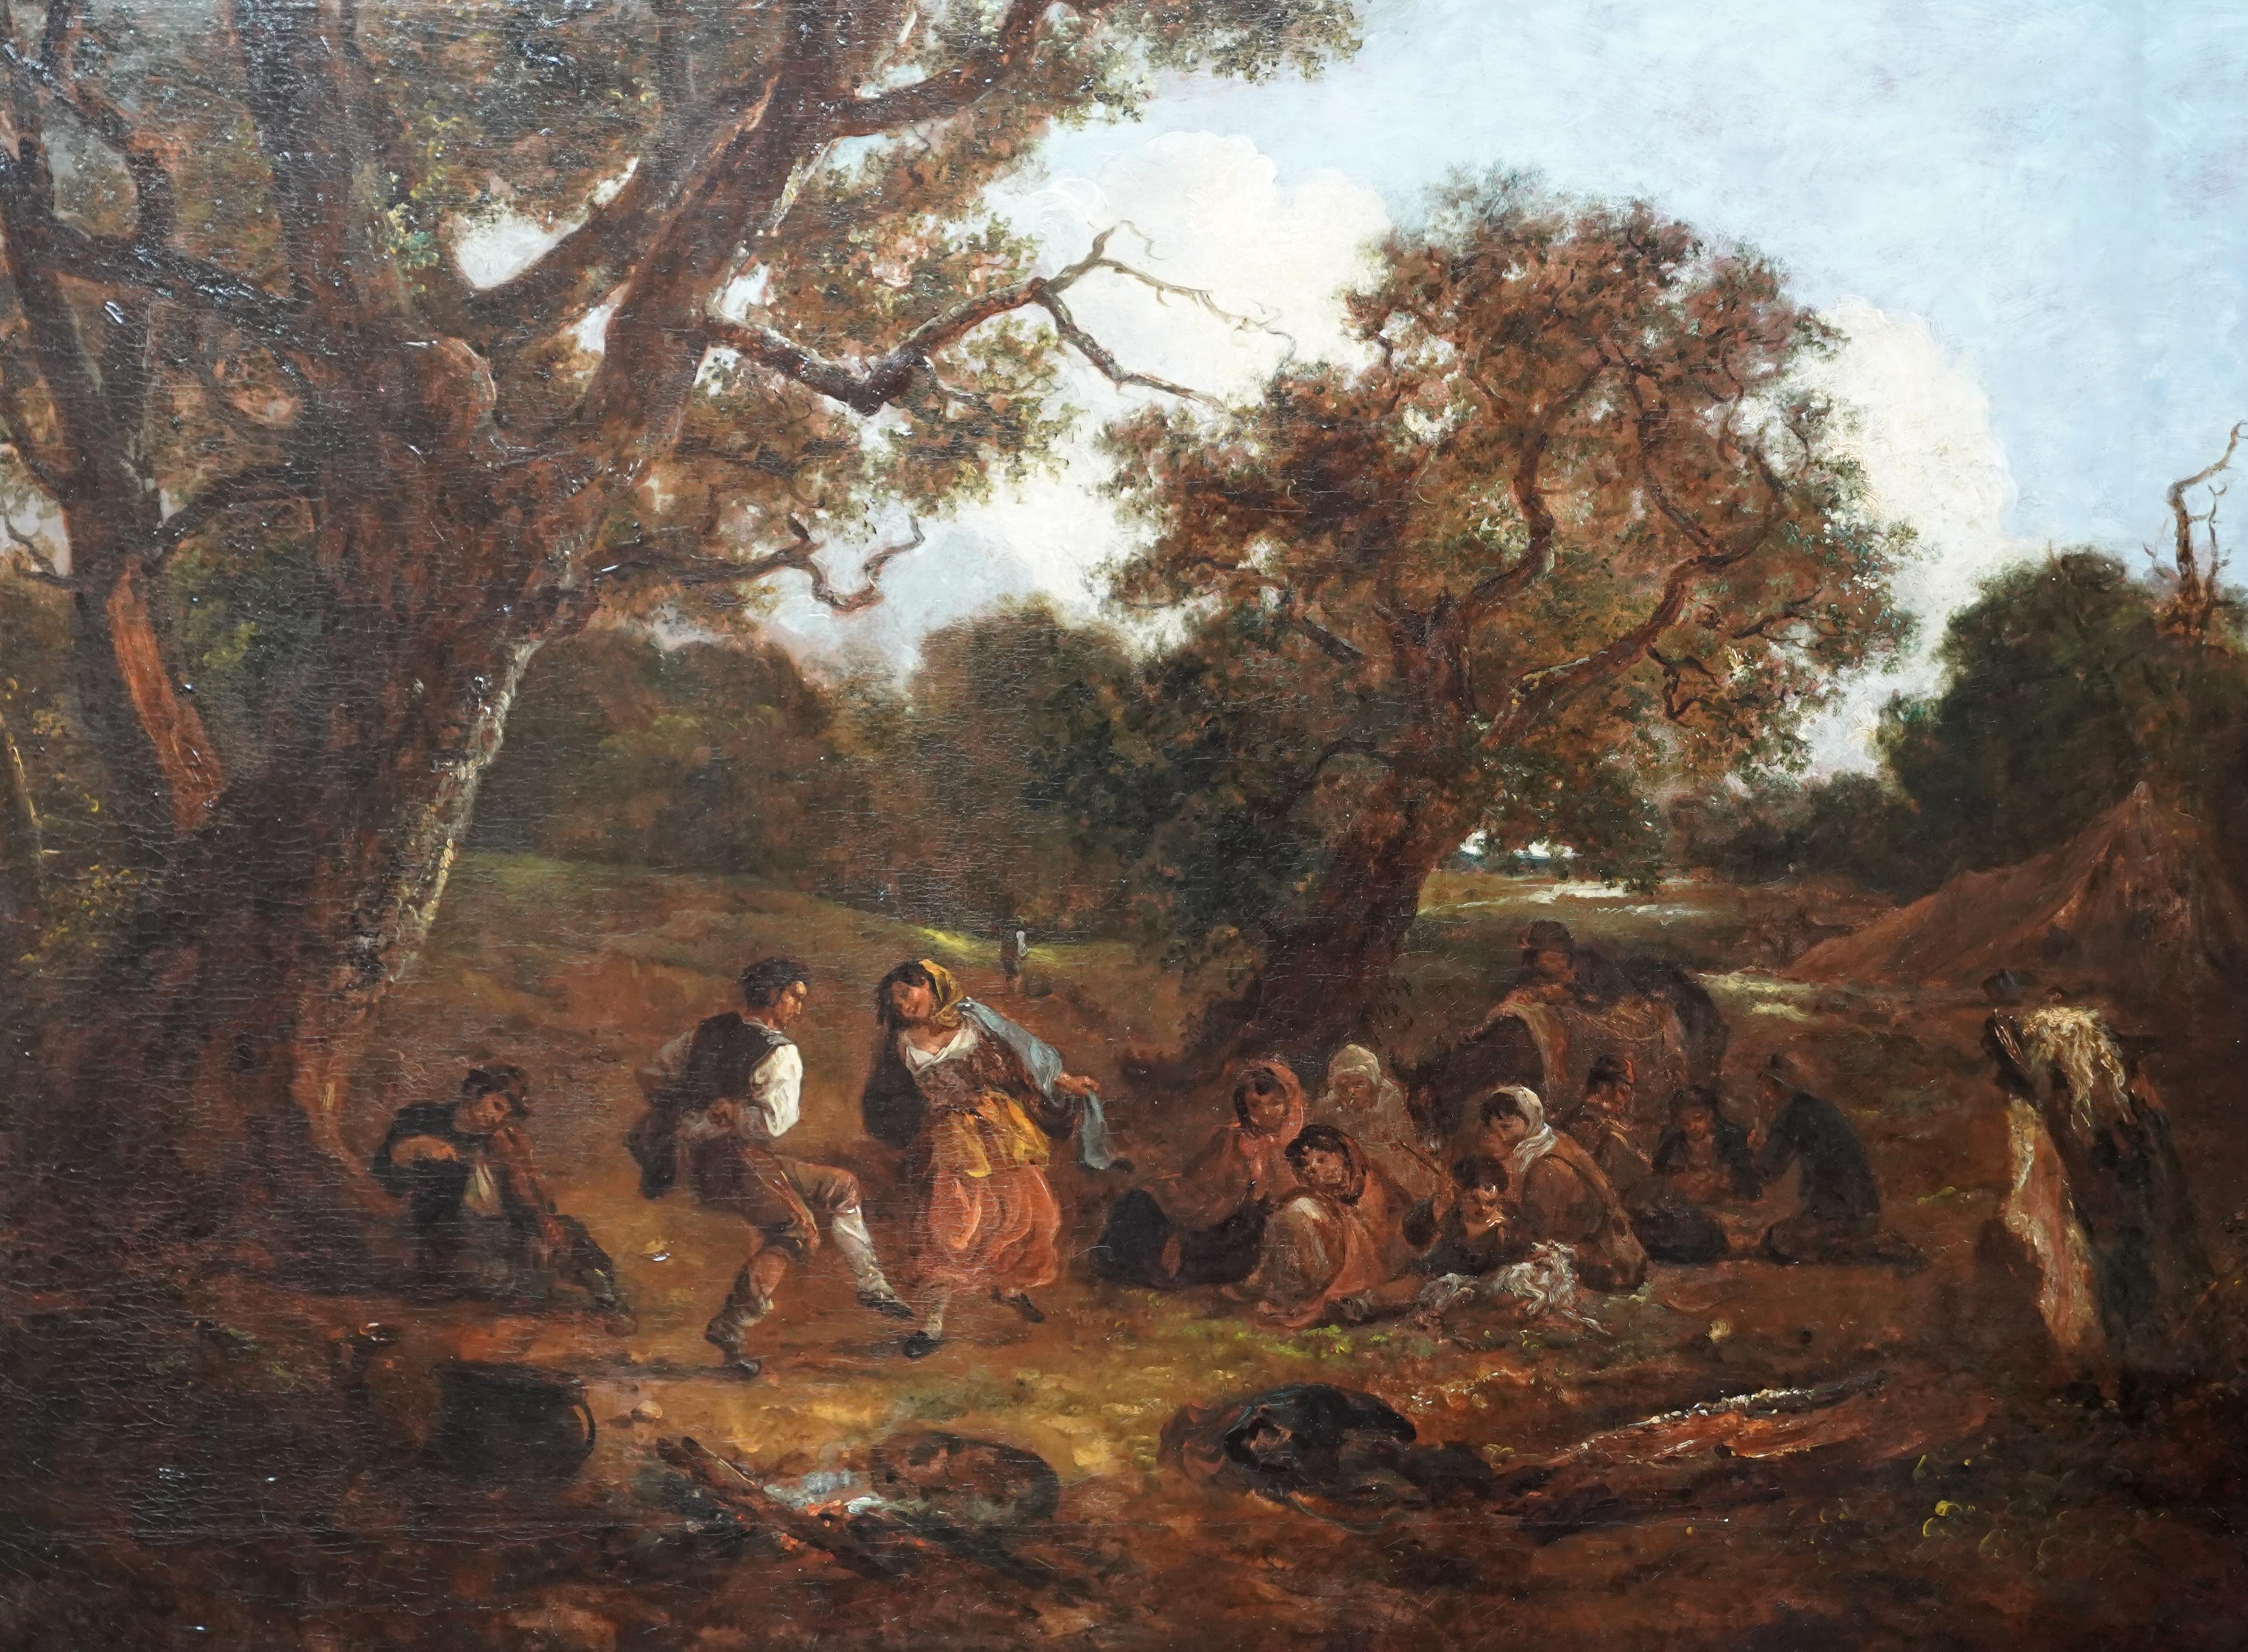 Dancers in a Landscape - British 19thC art figurative landscape oil painting - Old Masters Painting by Thomas Baker of Bath